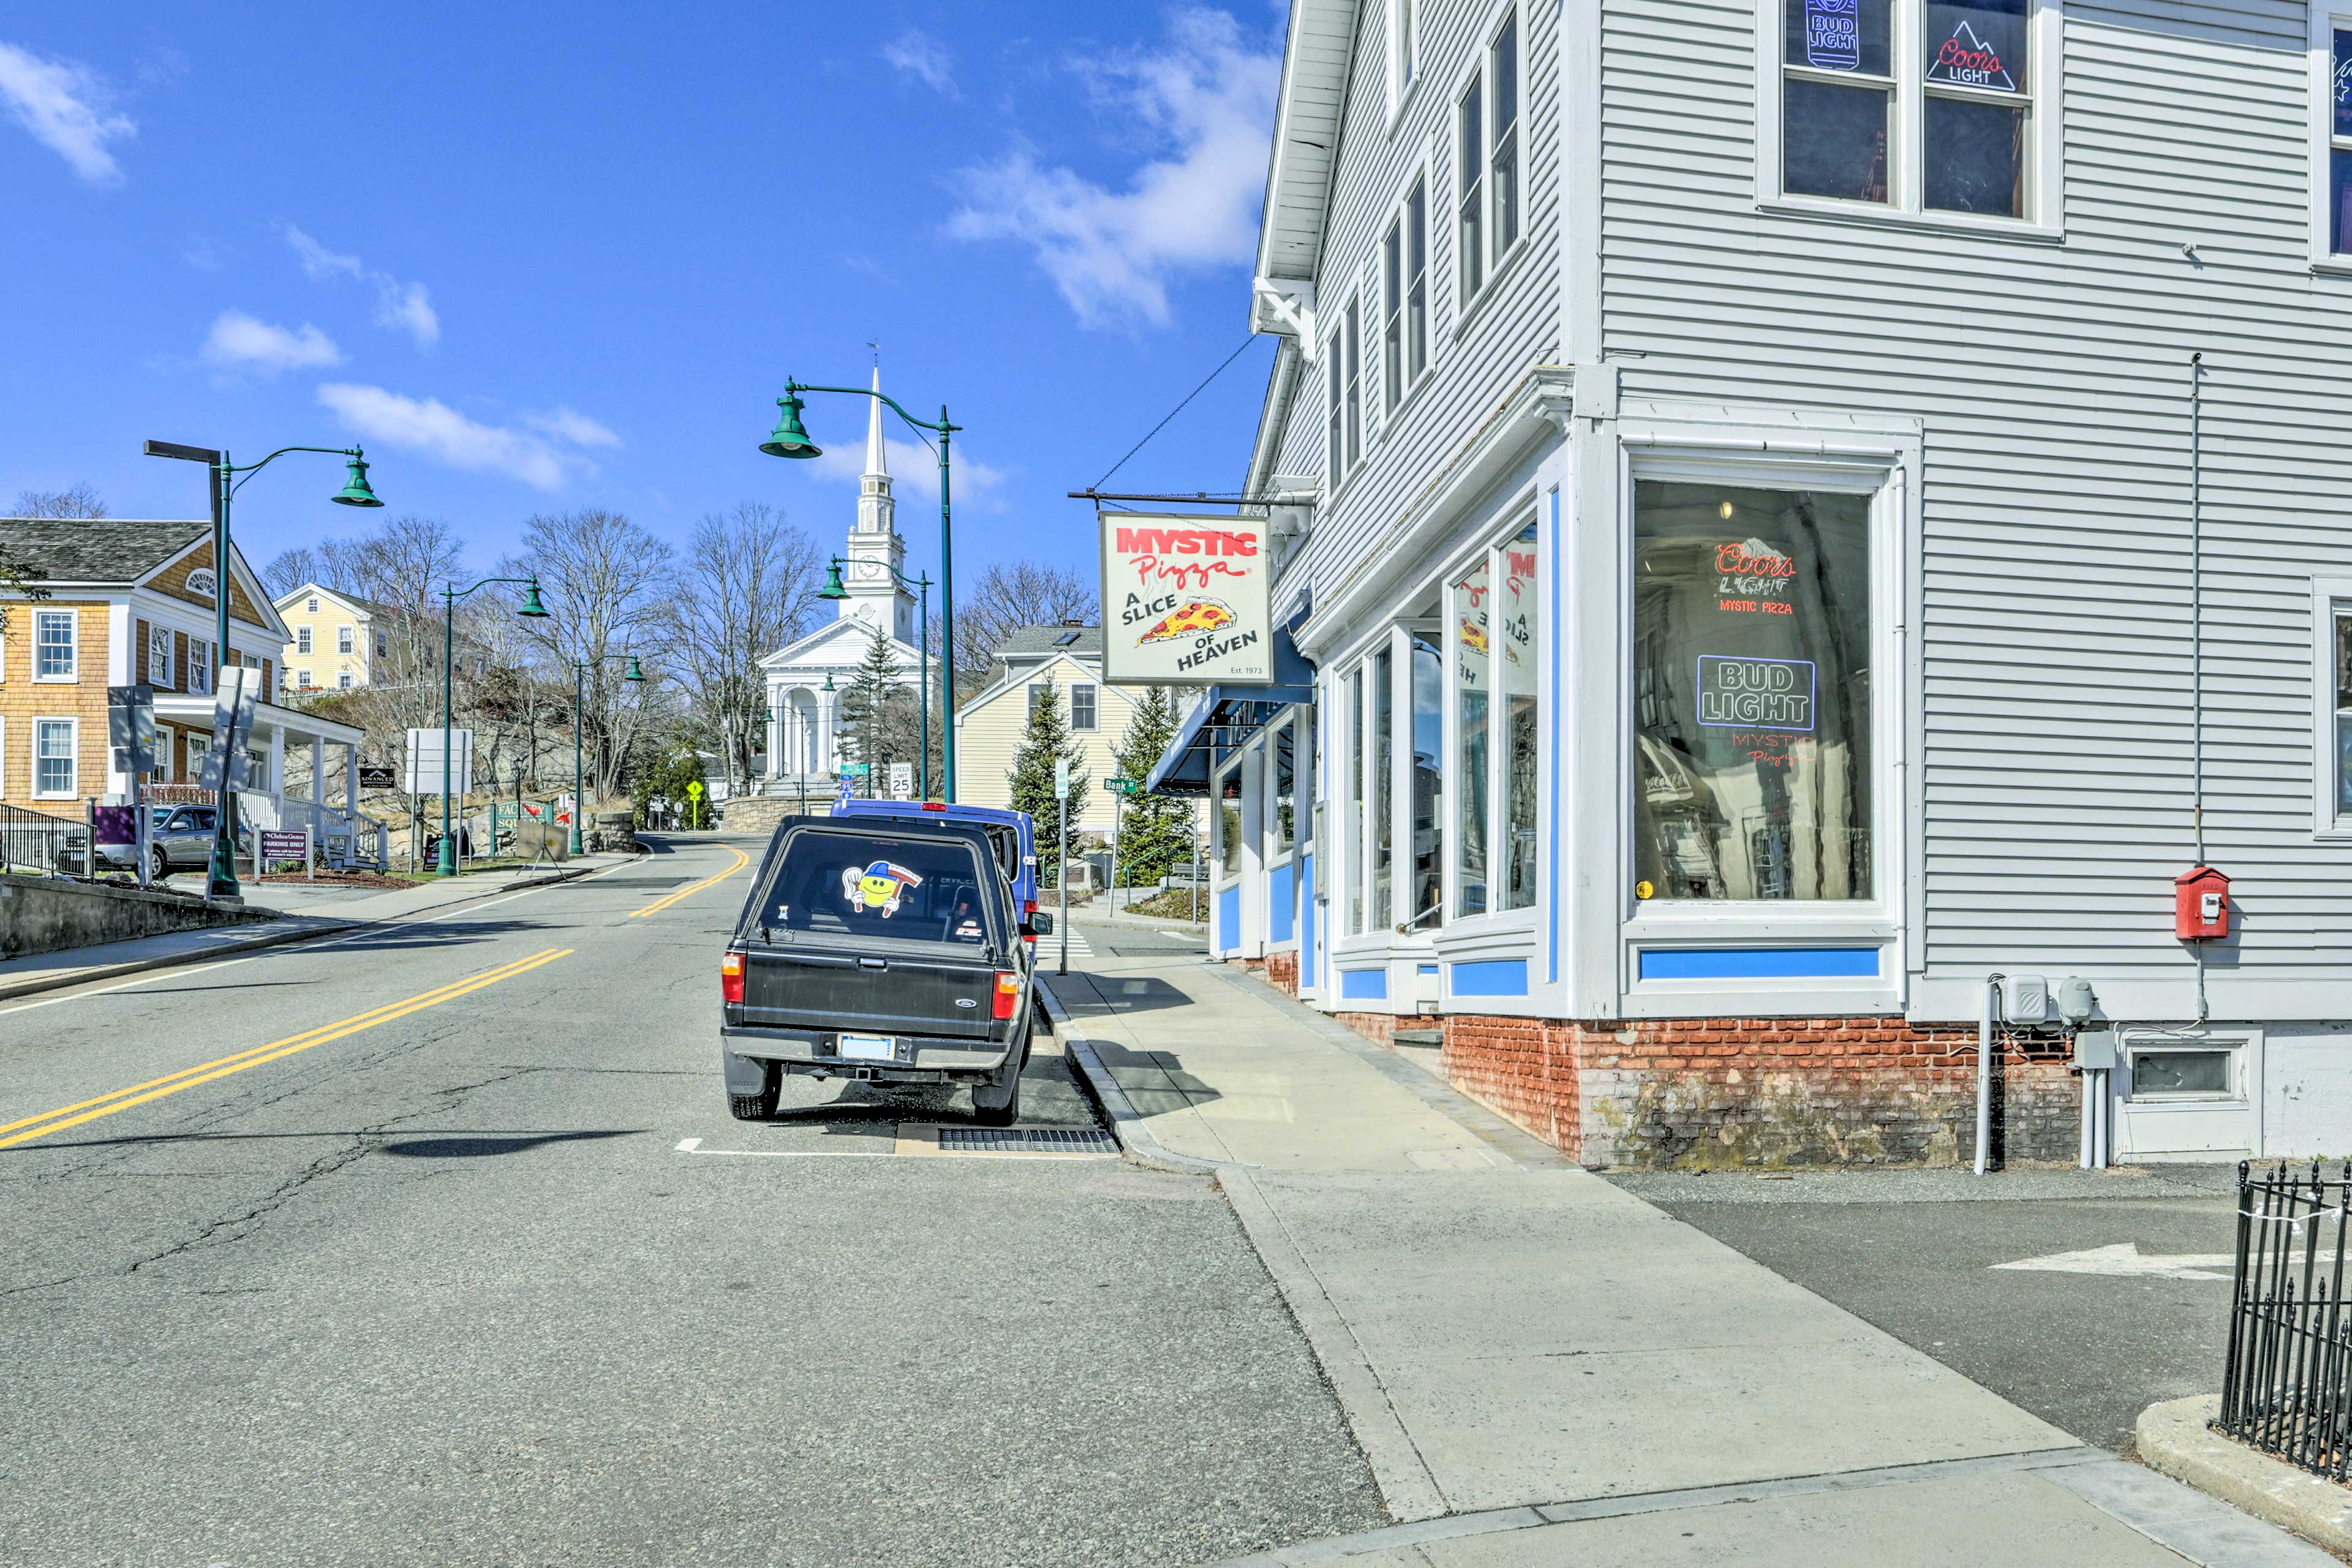 Downtown Mystic